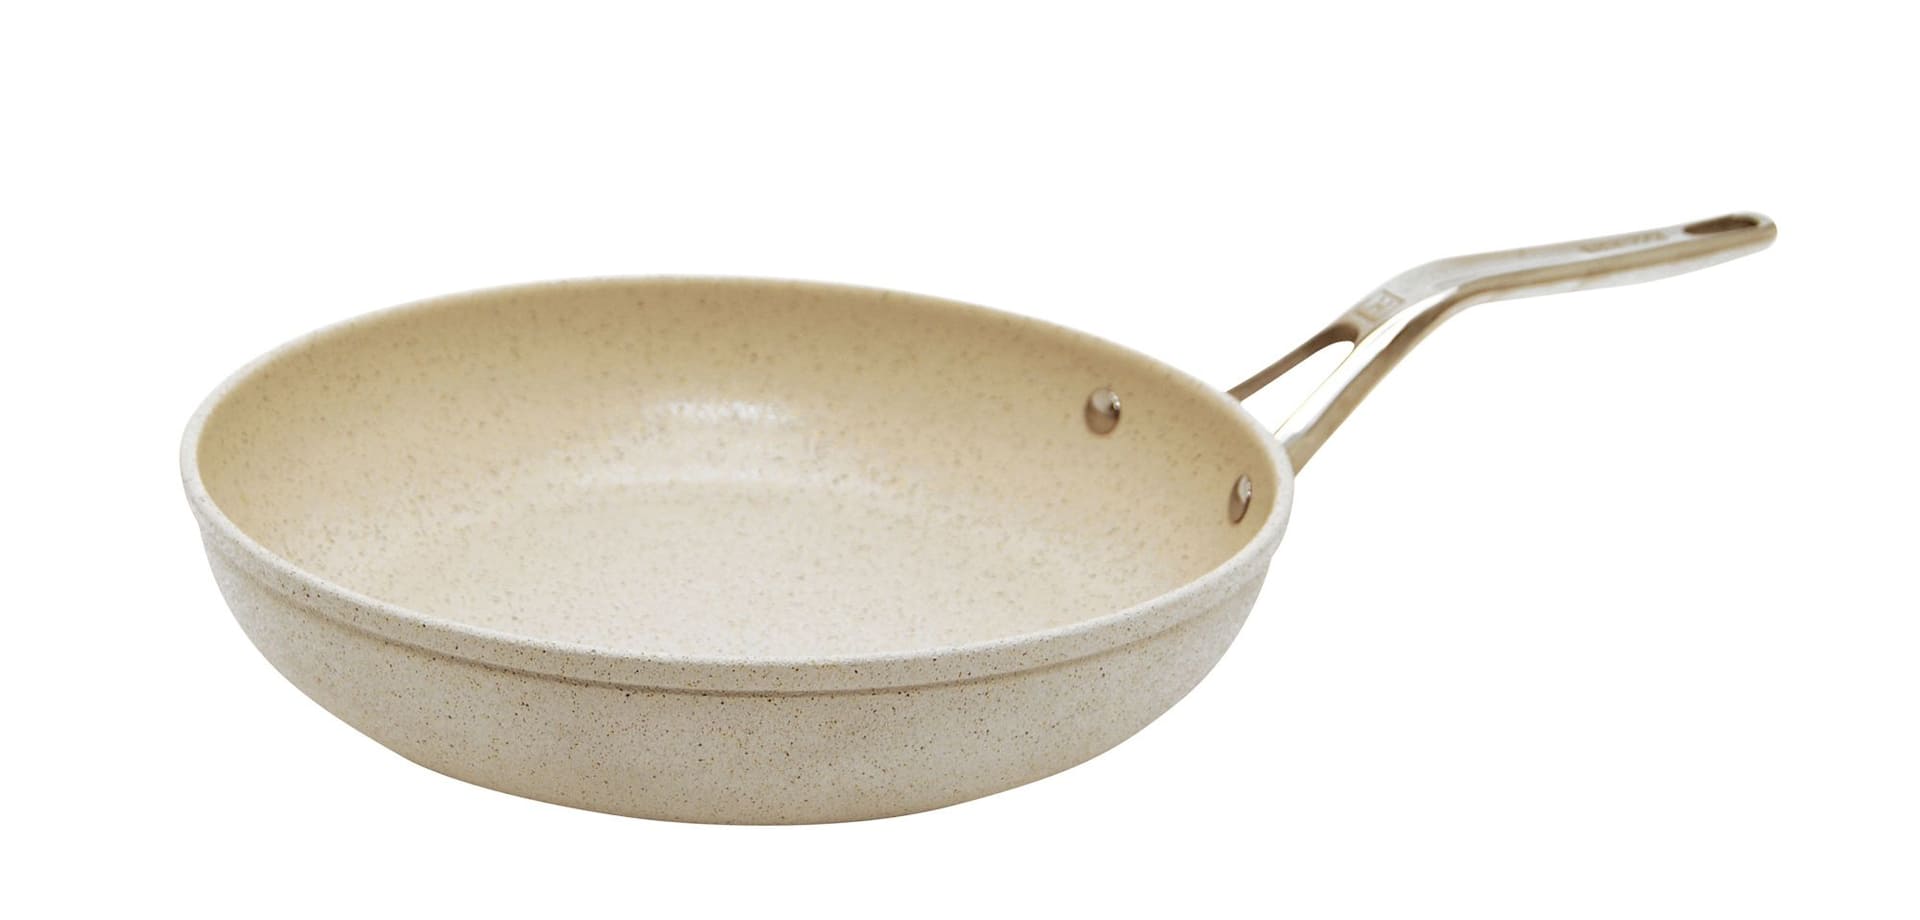 https://media-www.canadiantire.ca/product/living/kitchen/cookware/1429080/heritage-rock-20cm-ceramic-frypan-2955d743-6633-4319-9def-447d8aac3a7f-jpgrendition.jpg